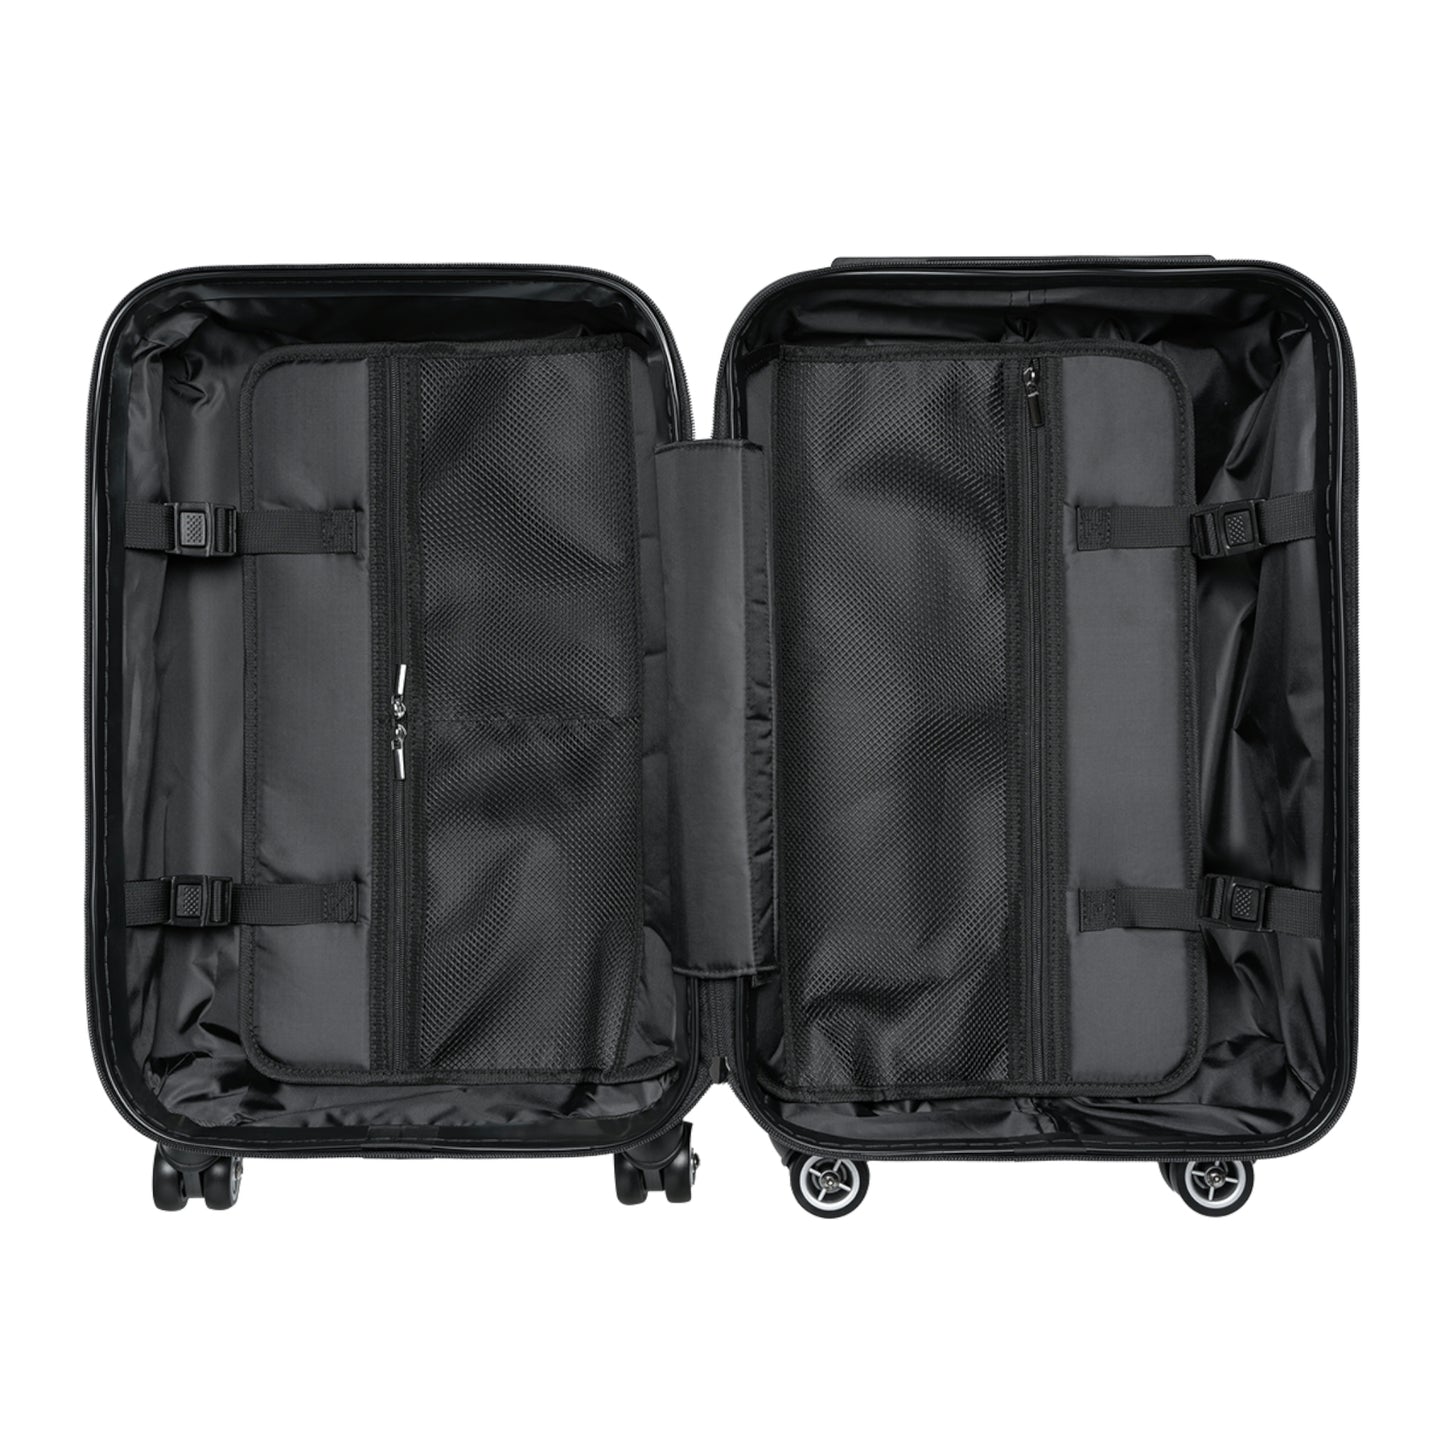 Getrott Yellow Butterfly Ornithoptera Goliath var Titan Black Cabin Suitcase Extended Storage Adjustable Telescopic Handle Double wheeled Polycarbonate Hard-shell Built-in Lock-Bags-Geotrott